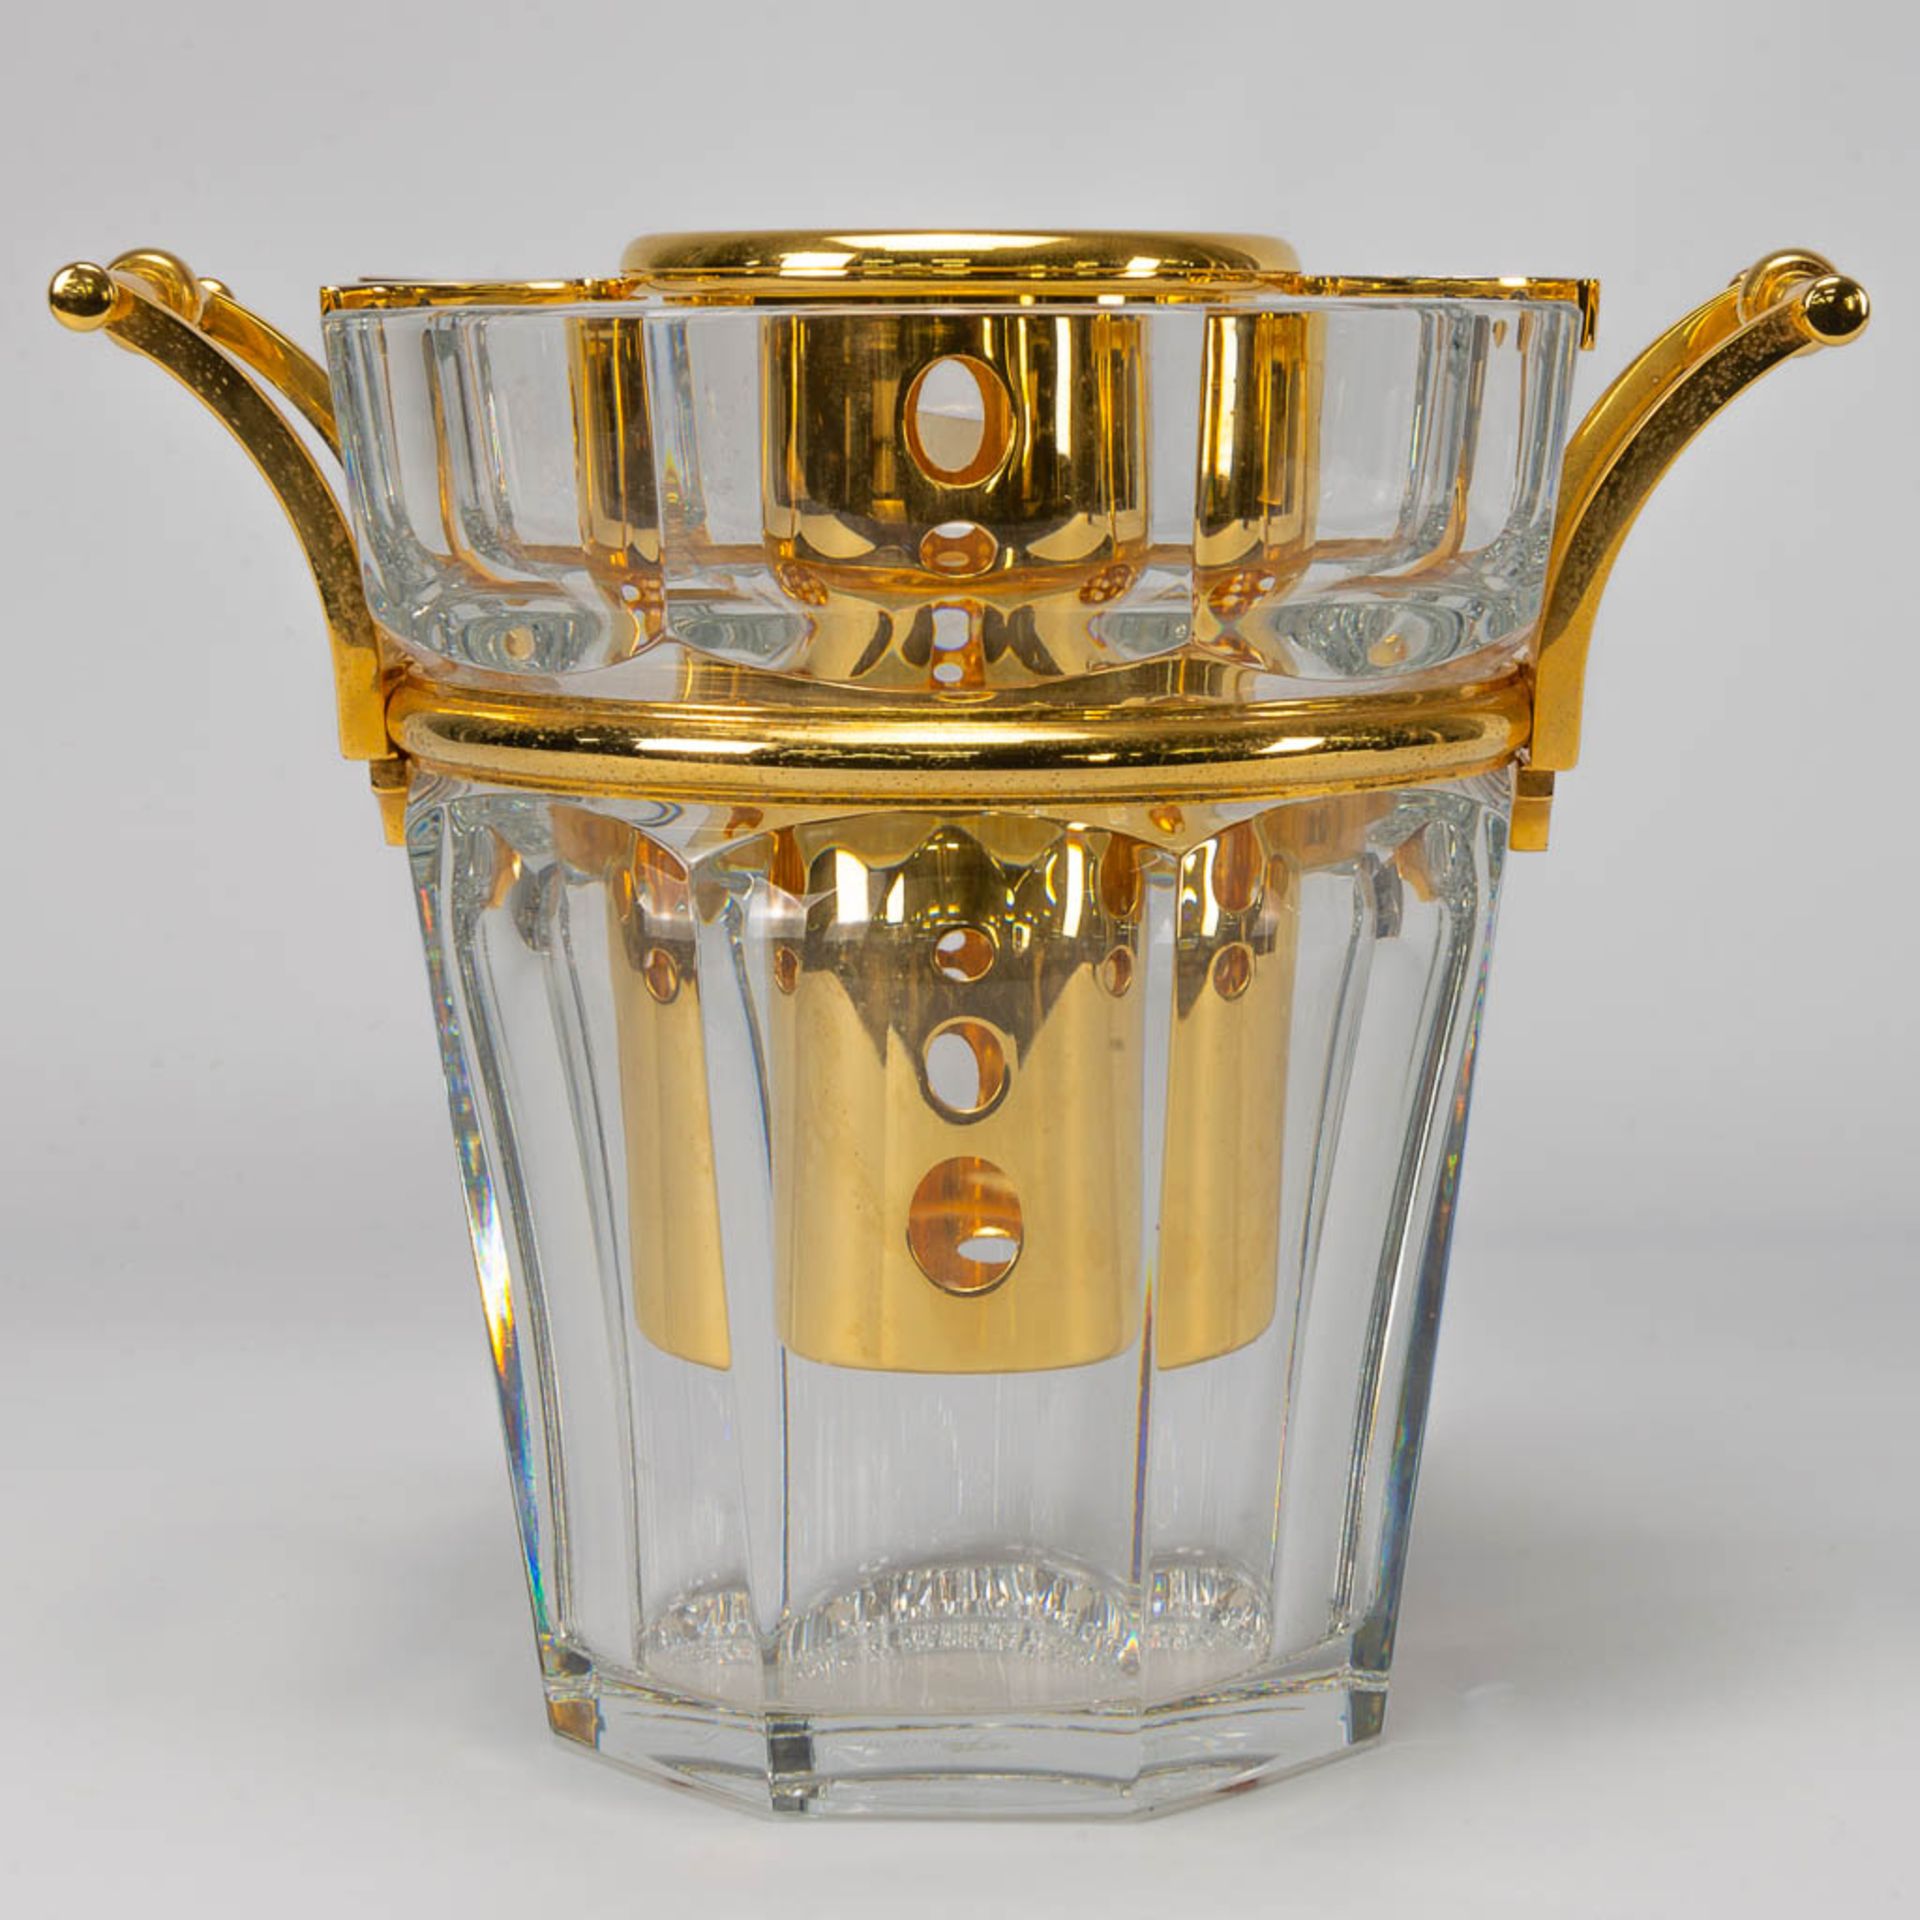 A Baccarat wine cooler or Champage bucket, made of Crystal with gold plated metal in the original bo - Image 7 of 12